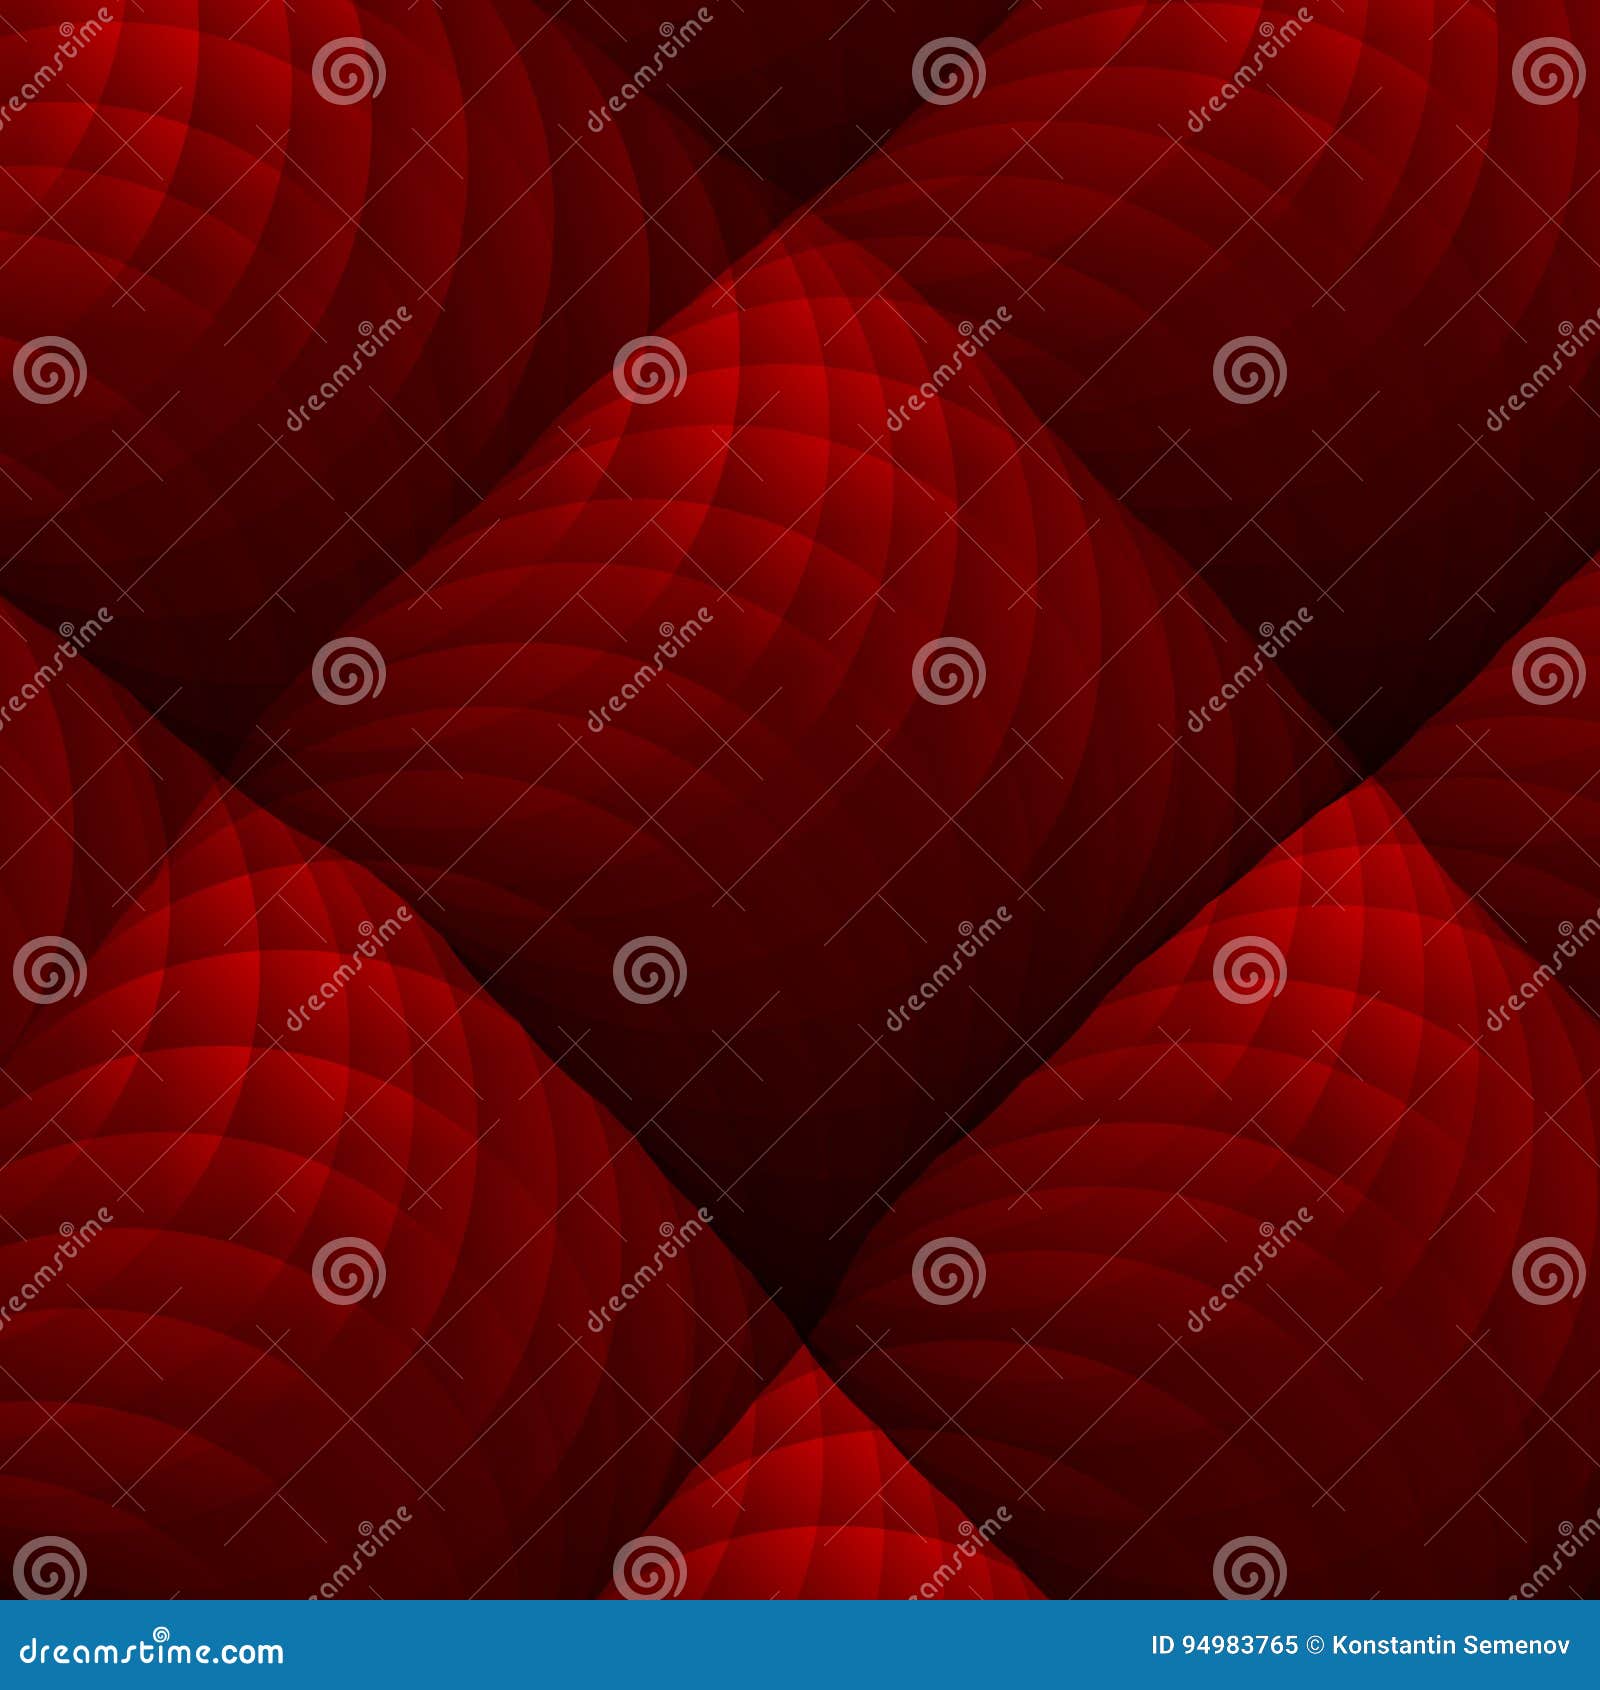 red abstract background.